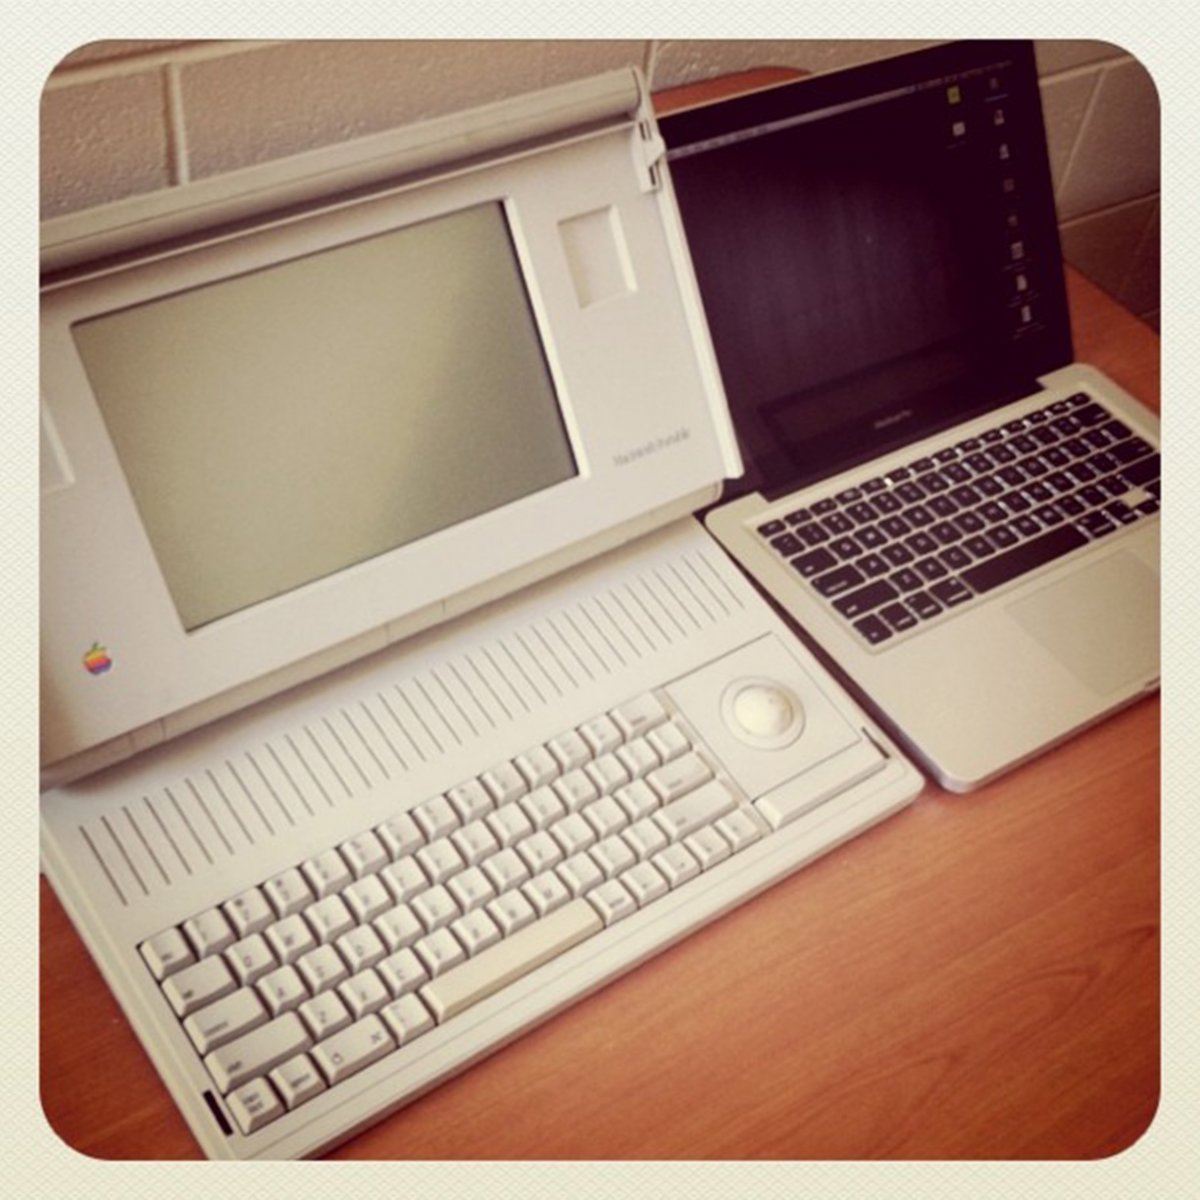 then-came-the-macintosh-portable-in-1991-apples-first-try-at-a-laptop-the-clamshell-design-would-feature-prominently-in-every-apple-laptop-since-then.jpg